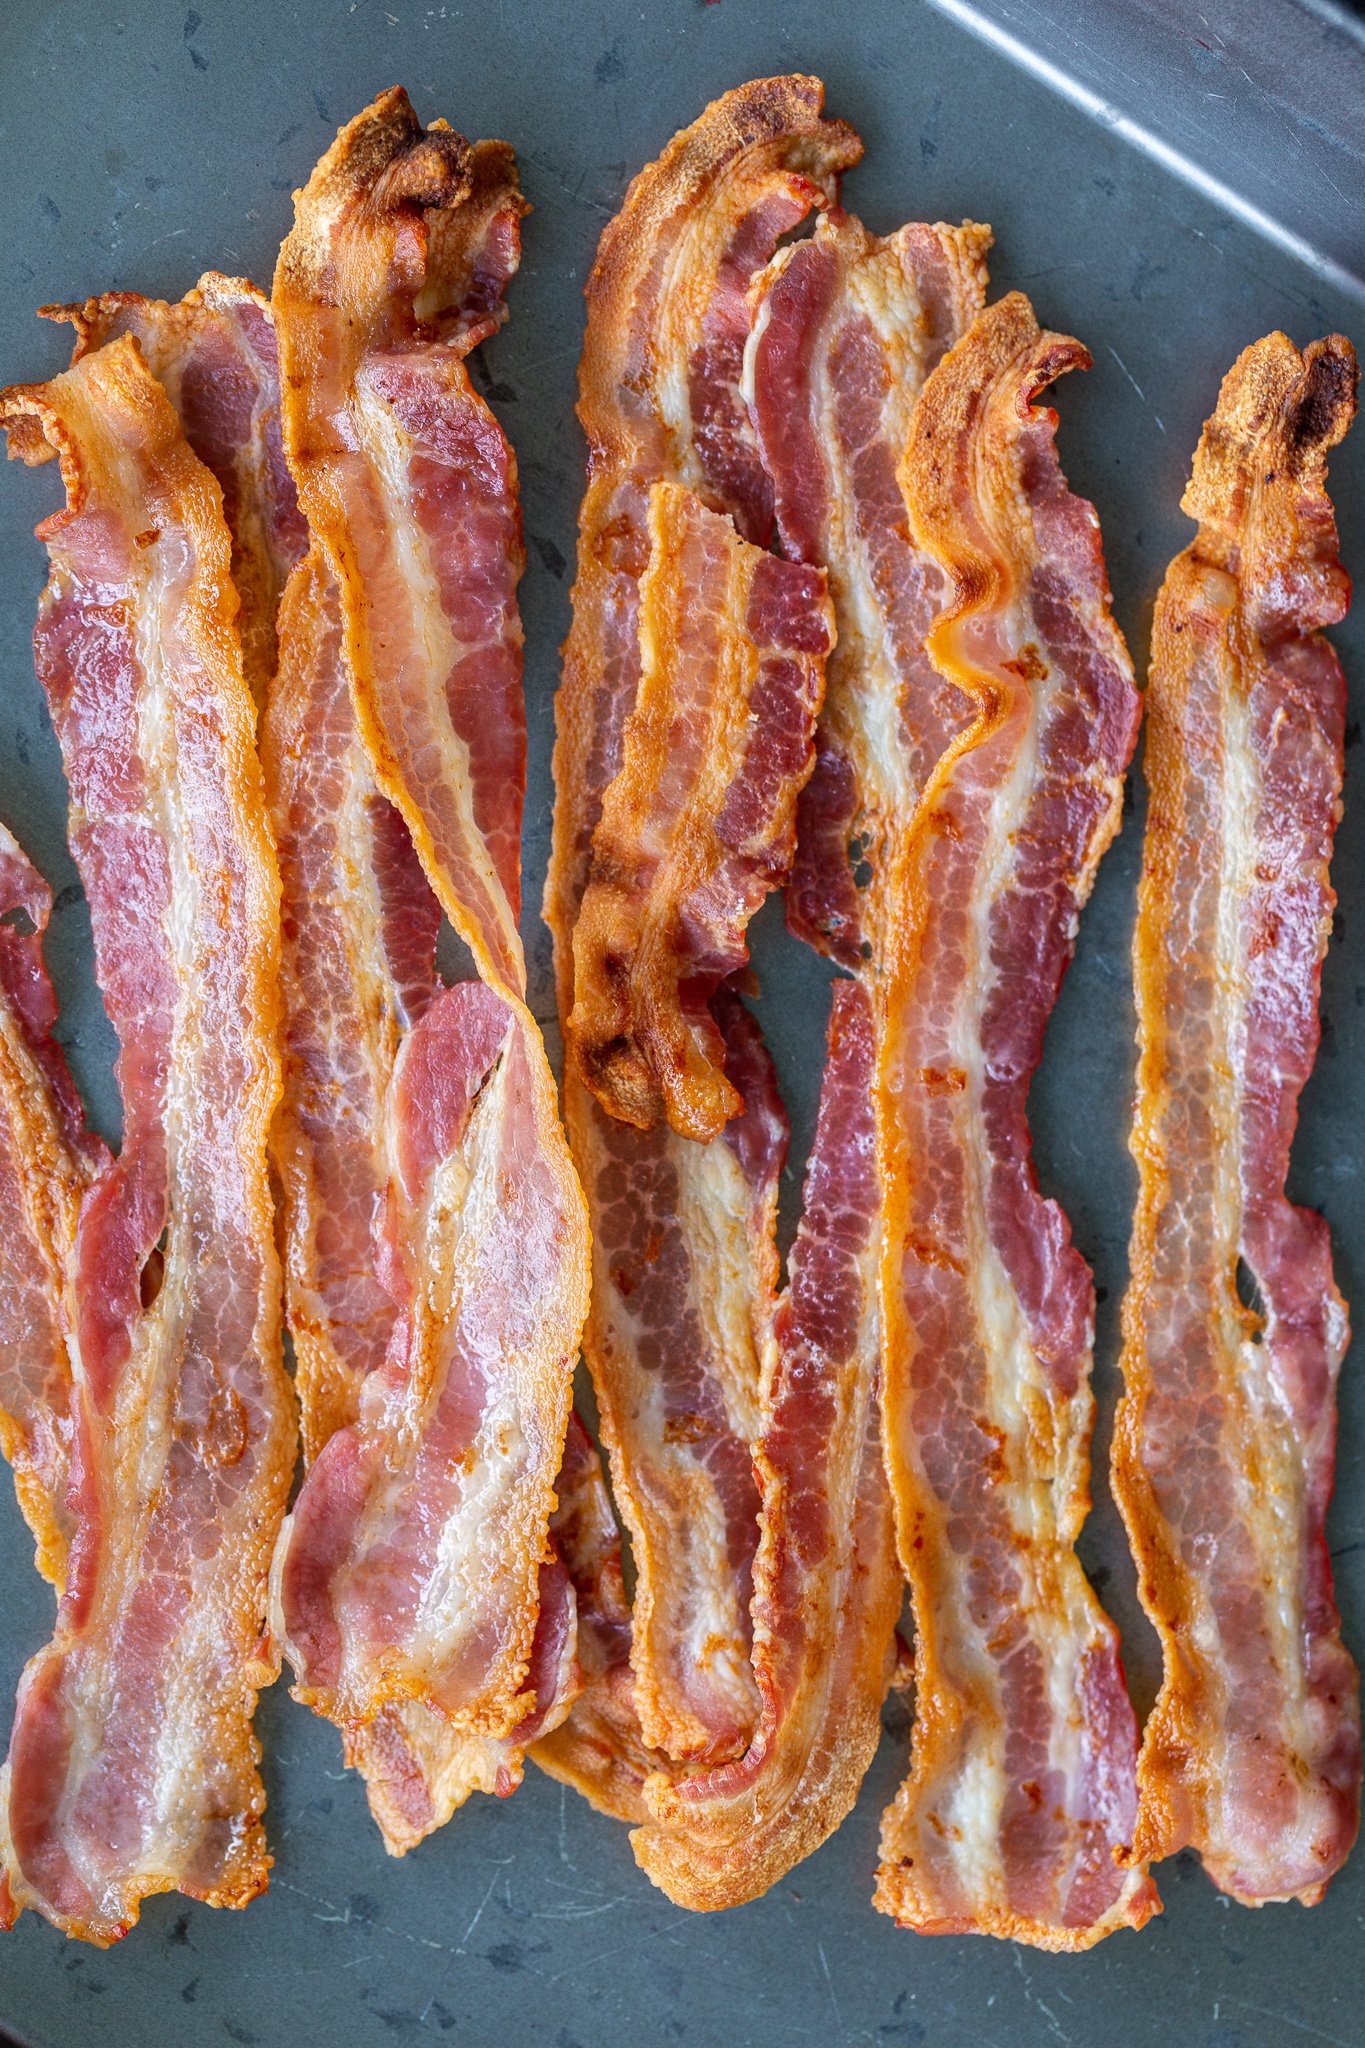 https://cdn.momsdish.com/wp-content/uploads/2021/07/How-To-Make-Perfect-Bacon-Every-Time-06.jpg